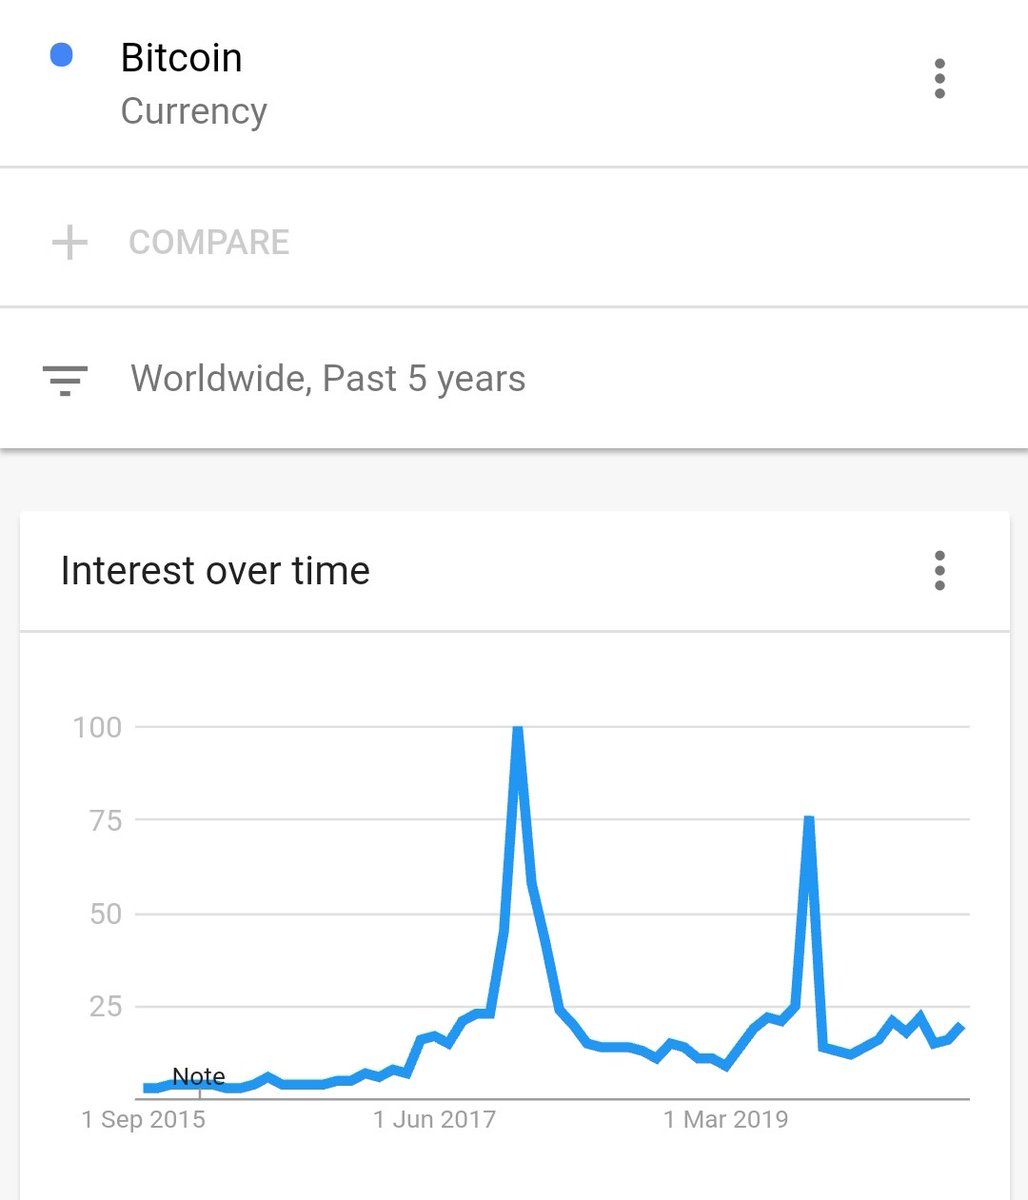 Bitcoin searches as a "currency" are tiny compared to their 2017 and 2019 peaks. This chart makes me wonder about the characteristic of the upcoming mania. Who will lead the show?